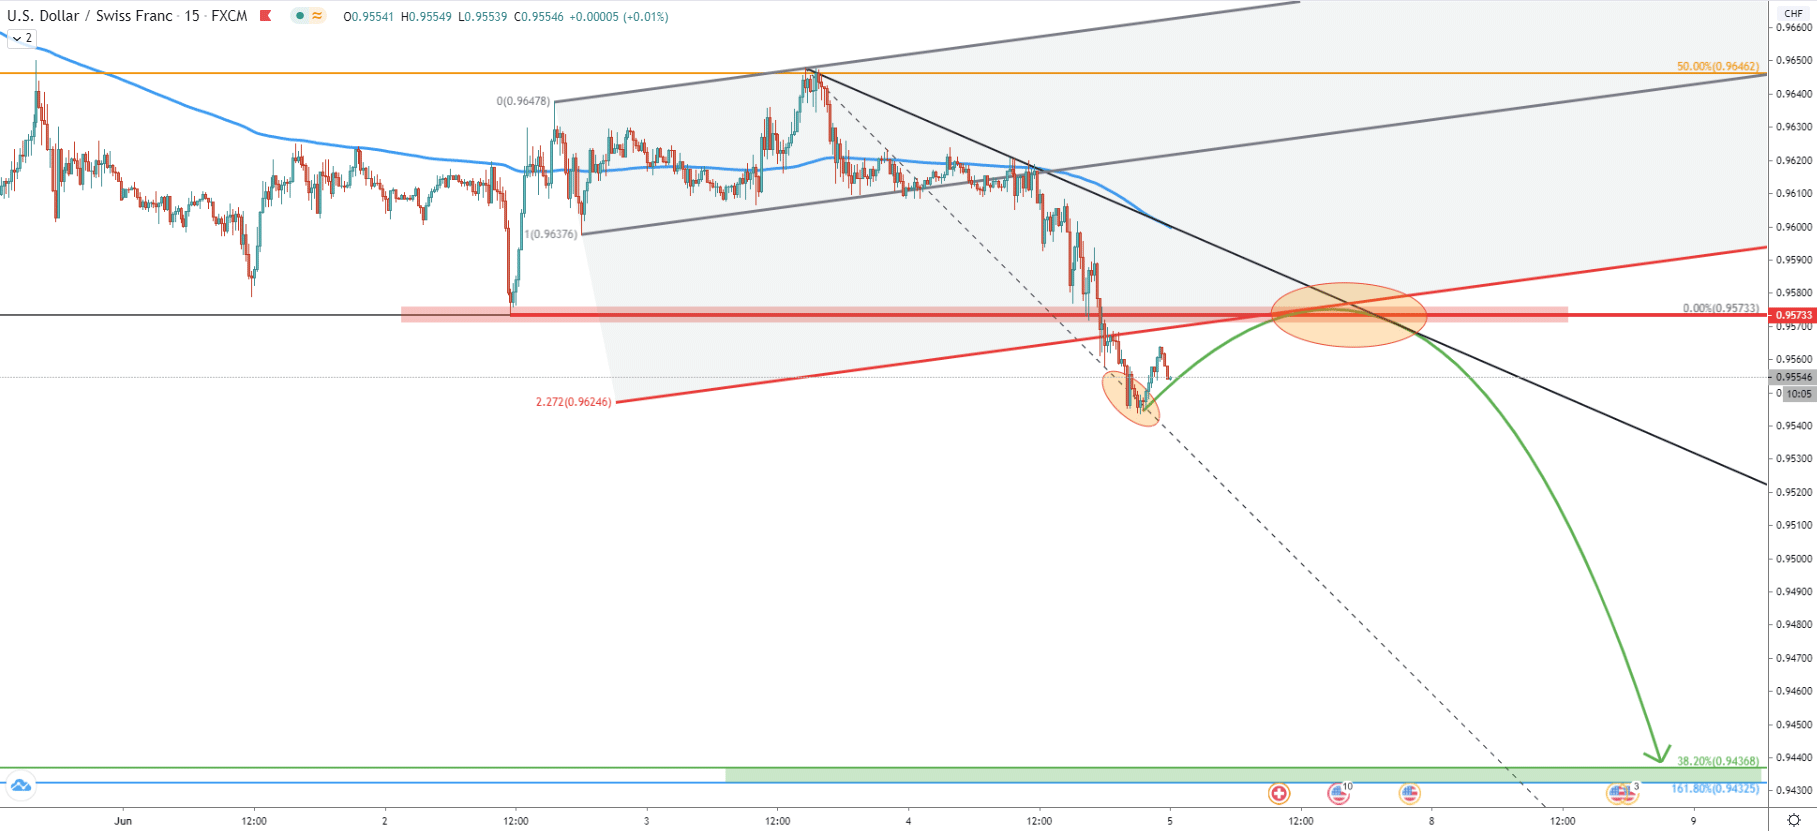 USD/CHF 15-Minute Technical Analysis 4 June 2020